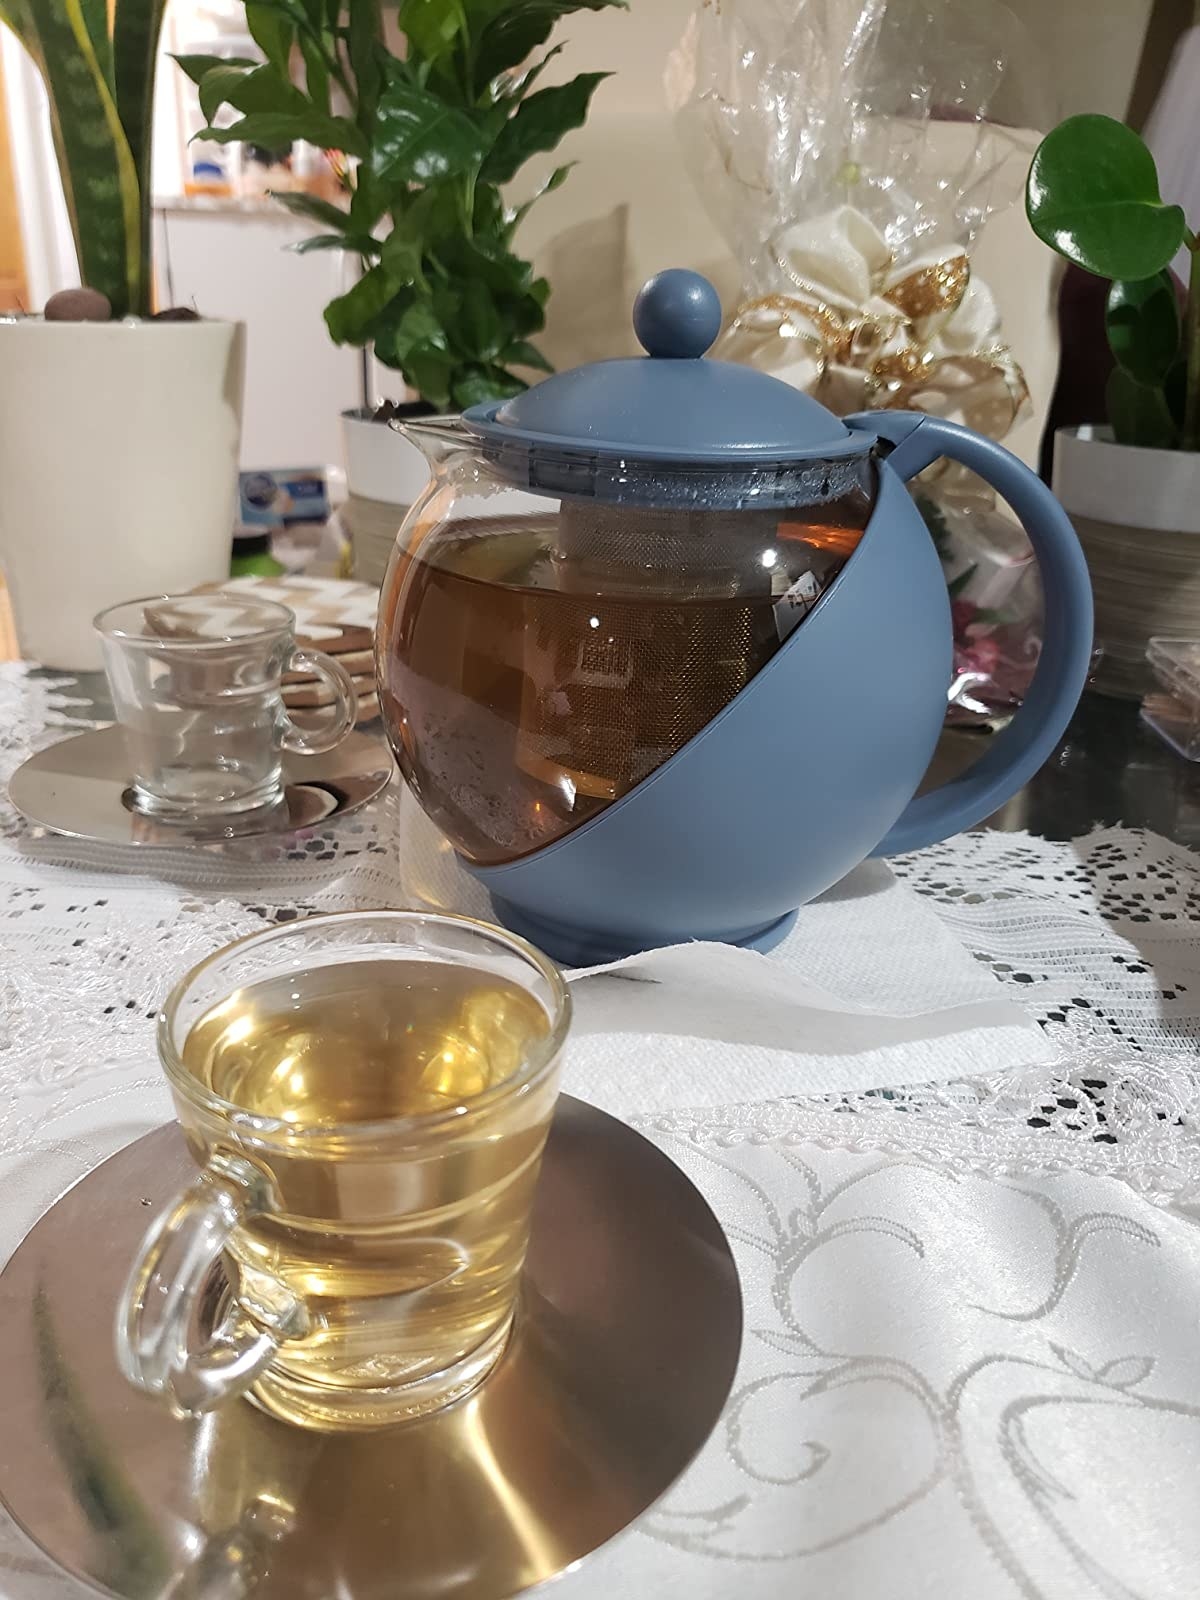 Half glass and half blue teapot next to glass teacup filled with tea